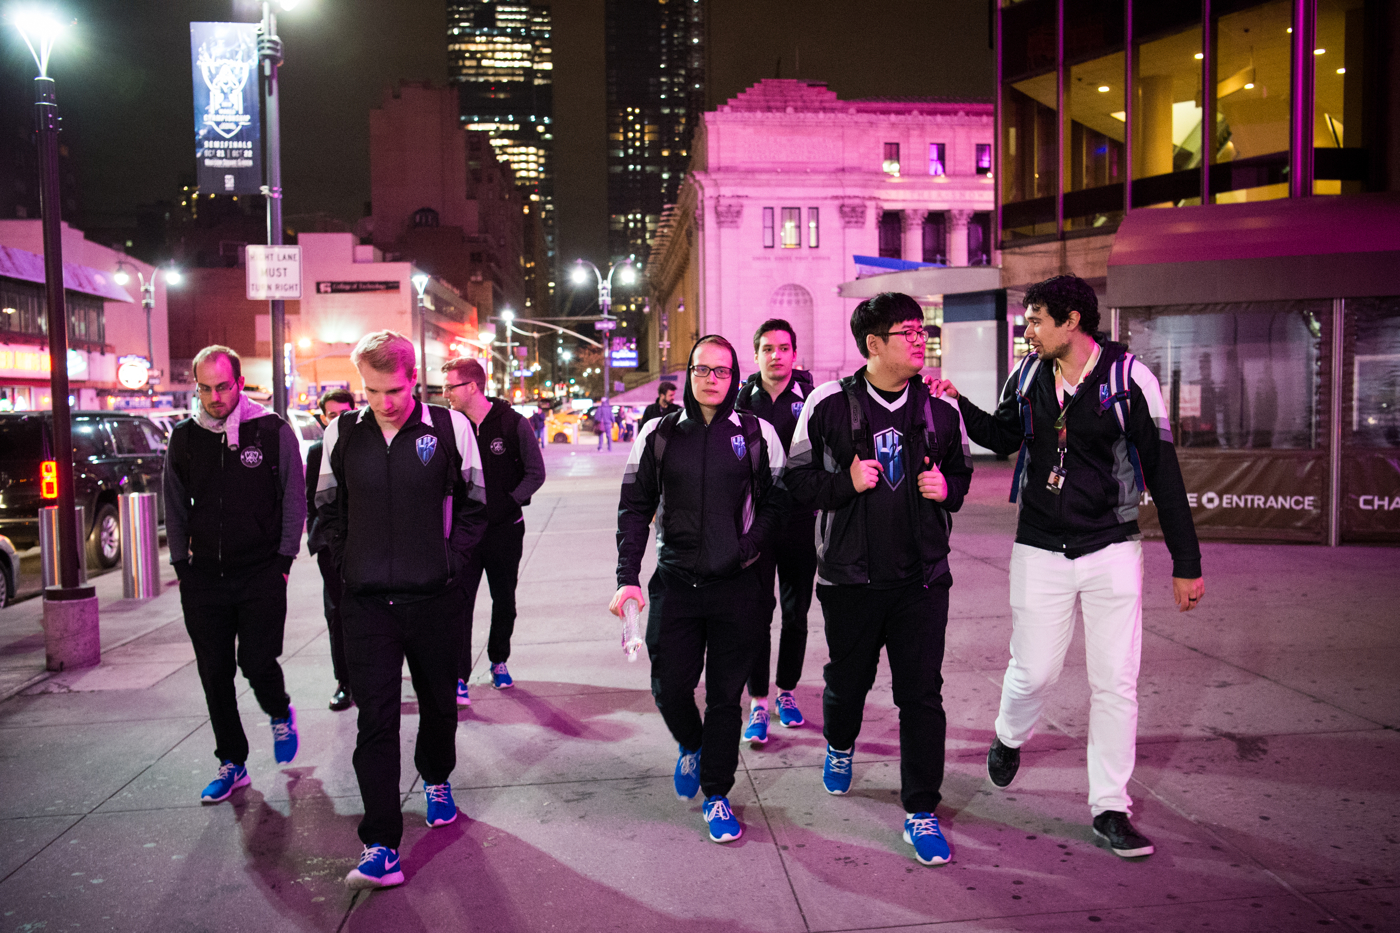  H2k leaves Madison Square Garden after taking photographs with a few fans after their loss to Samsung Galaxy. 